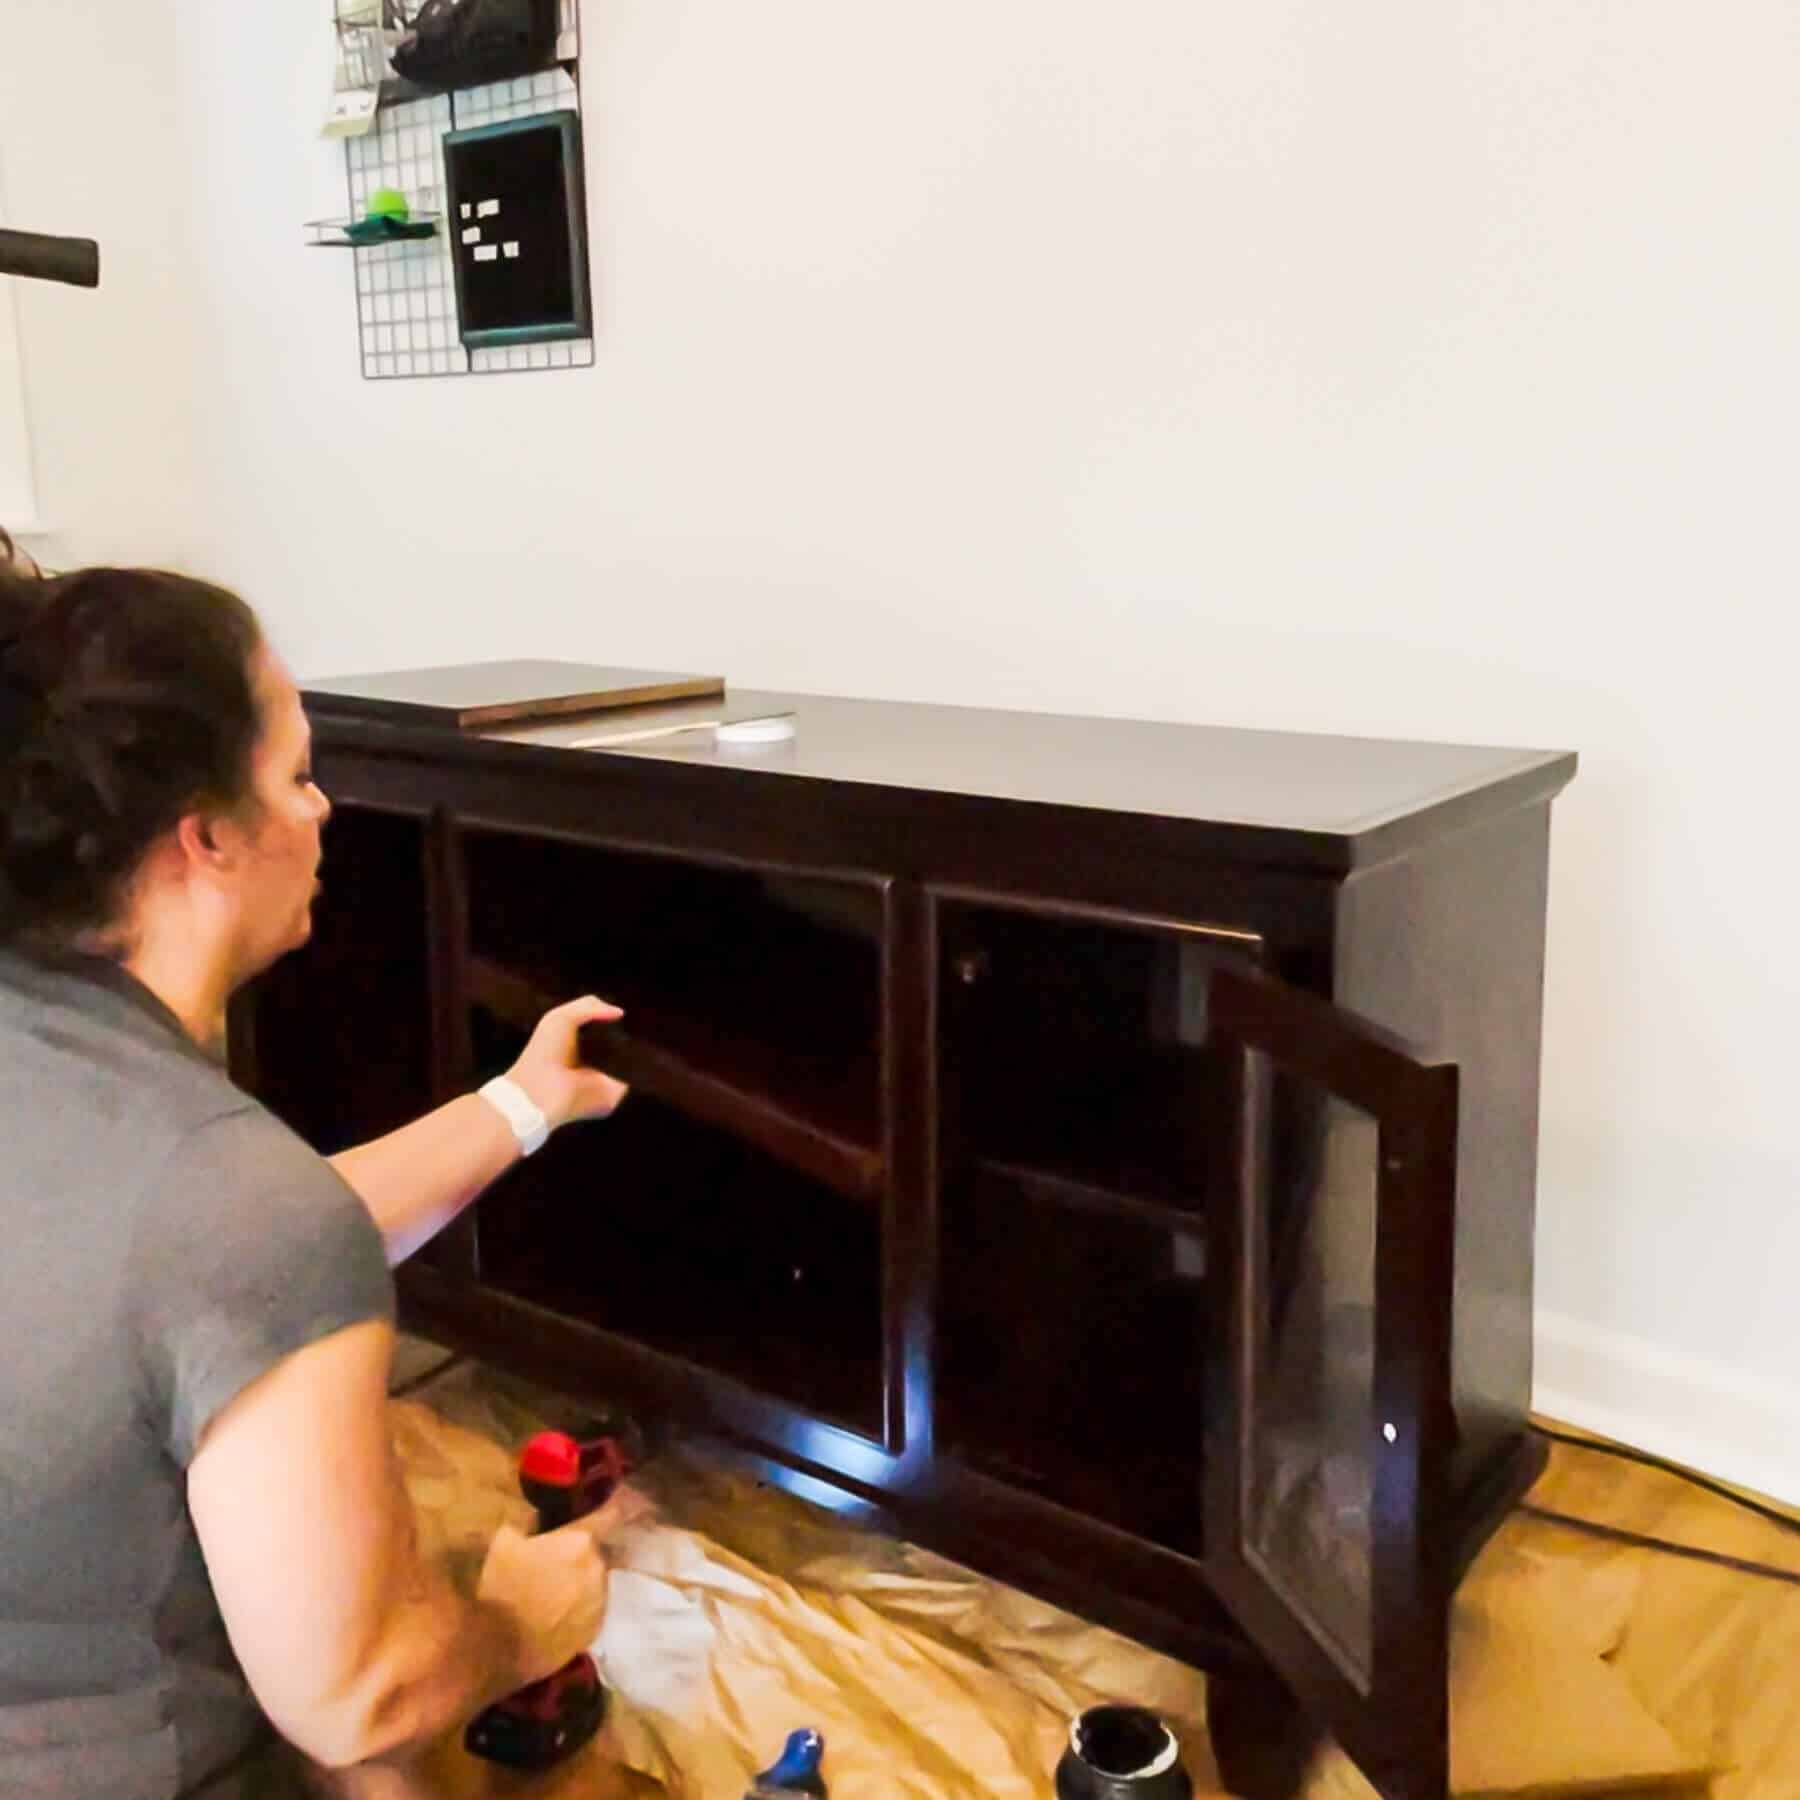 woman removing shelves from an entertainment center